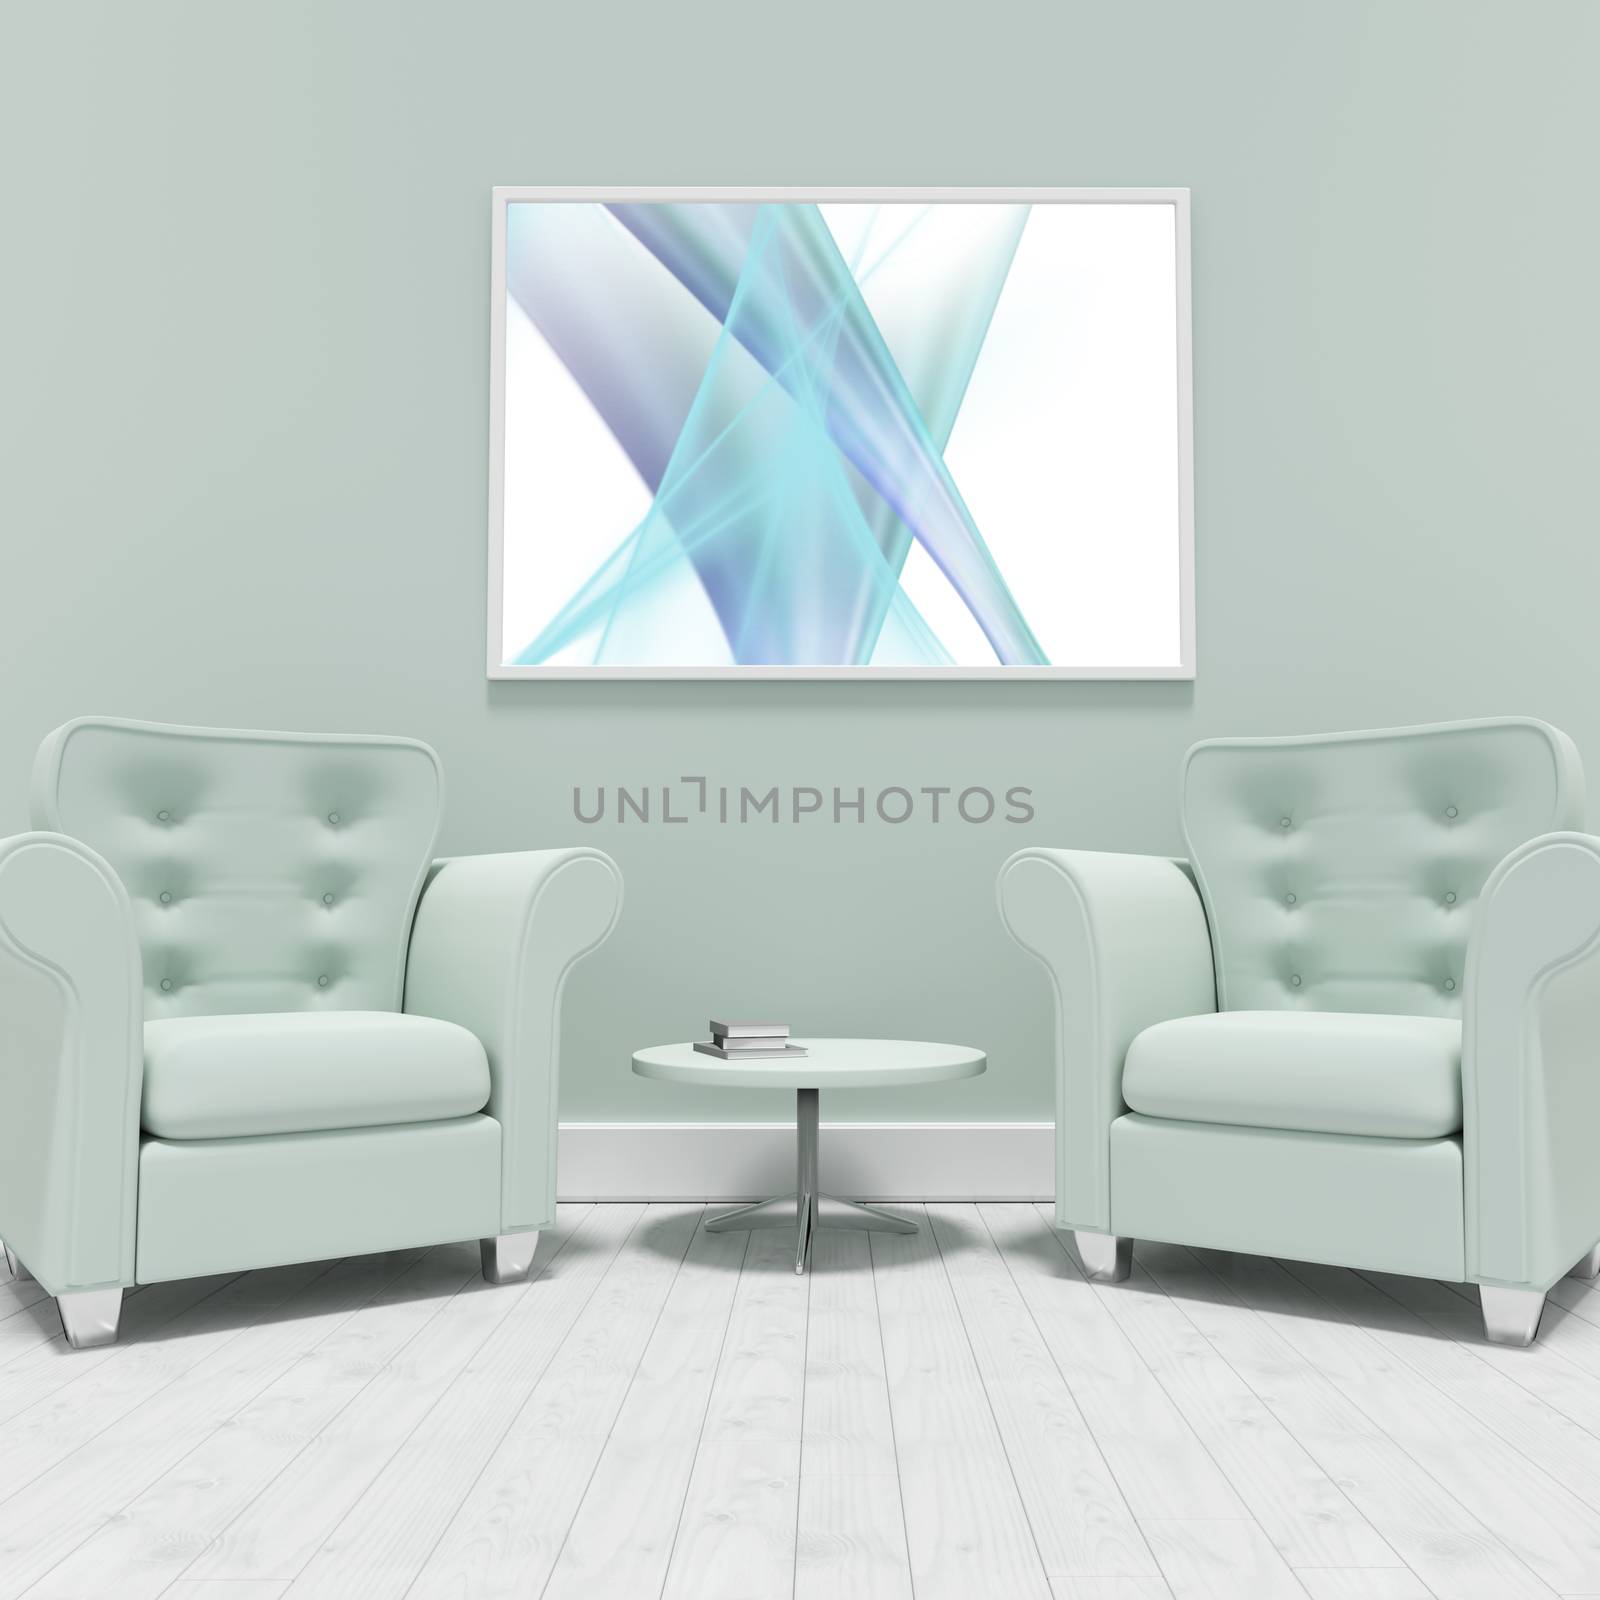 Composite image of blue light ray against white background against green armchairs against blank picture frame 